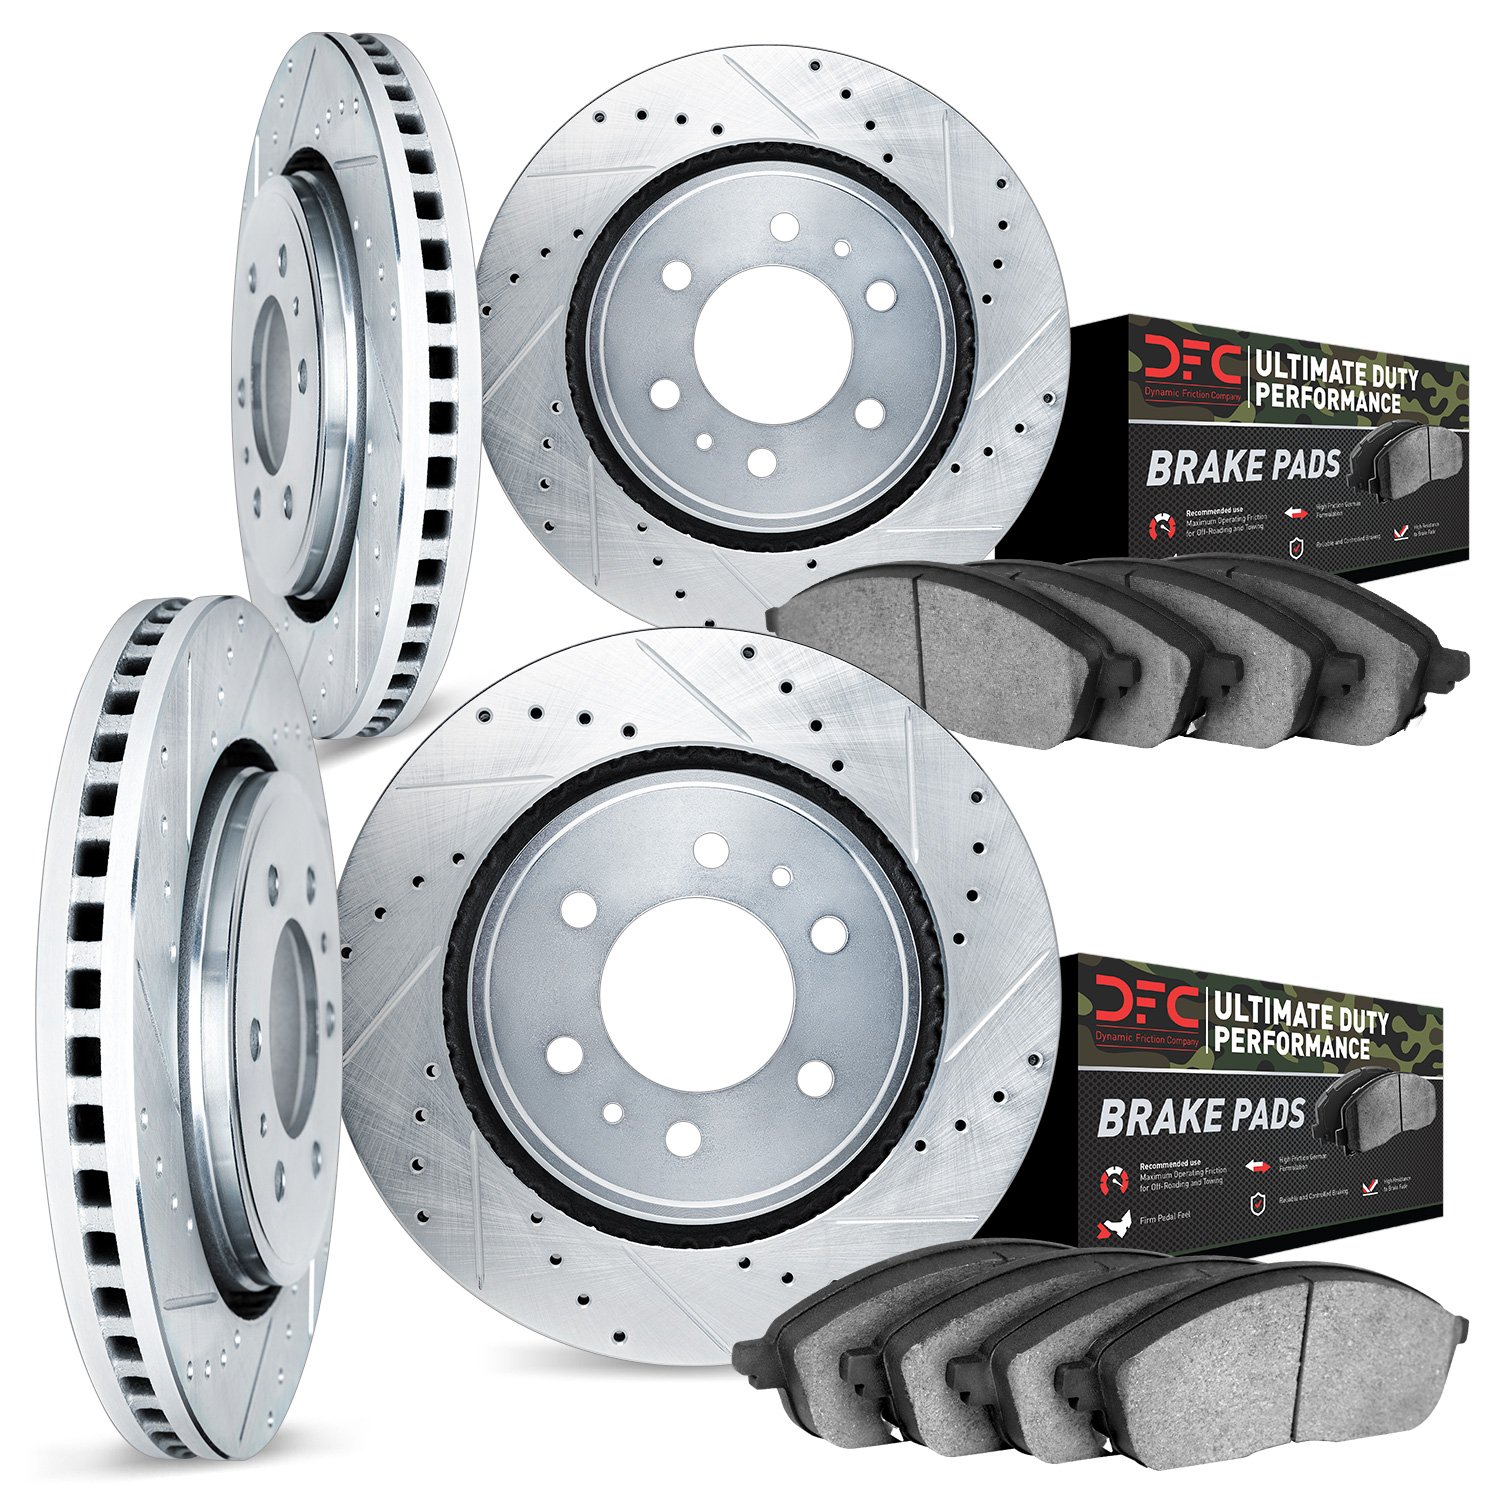 7404-76005 Drilled/Slotted Brake Rotors with Ultimate-Duty Brake Pads Kit [Silver], 2010-2014 Lexus/Toyota/Scion, Position: Fron